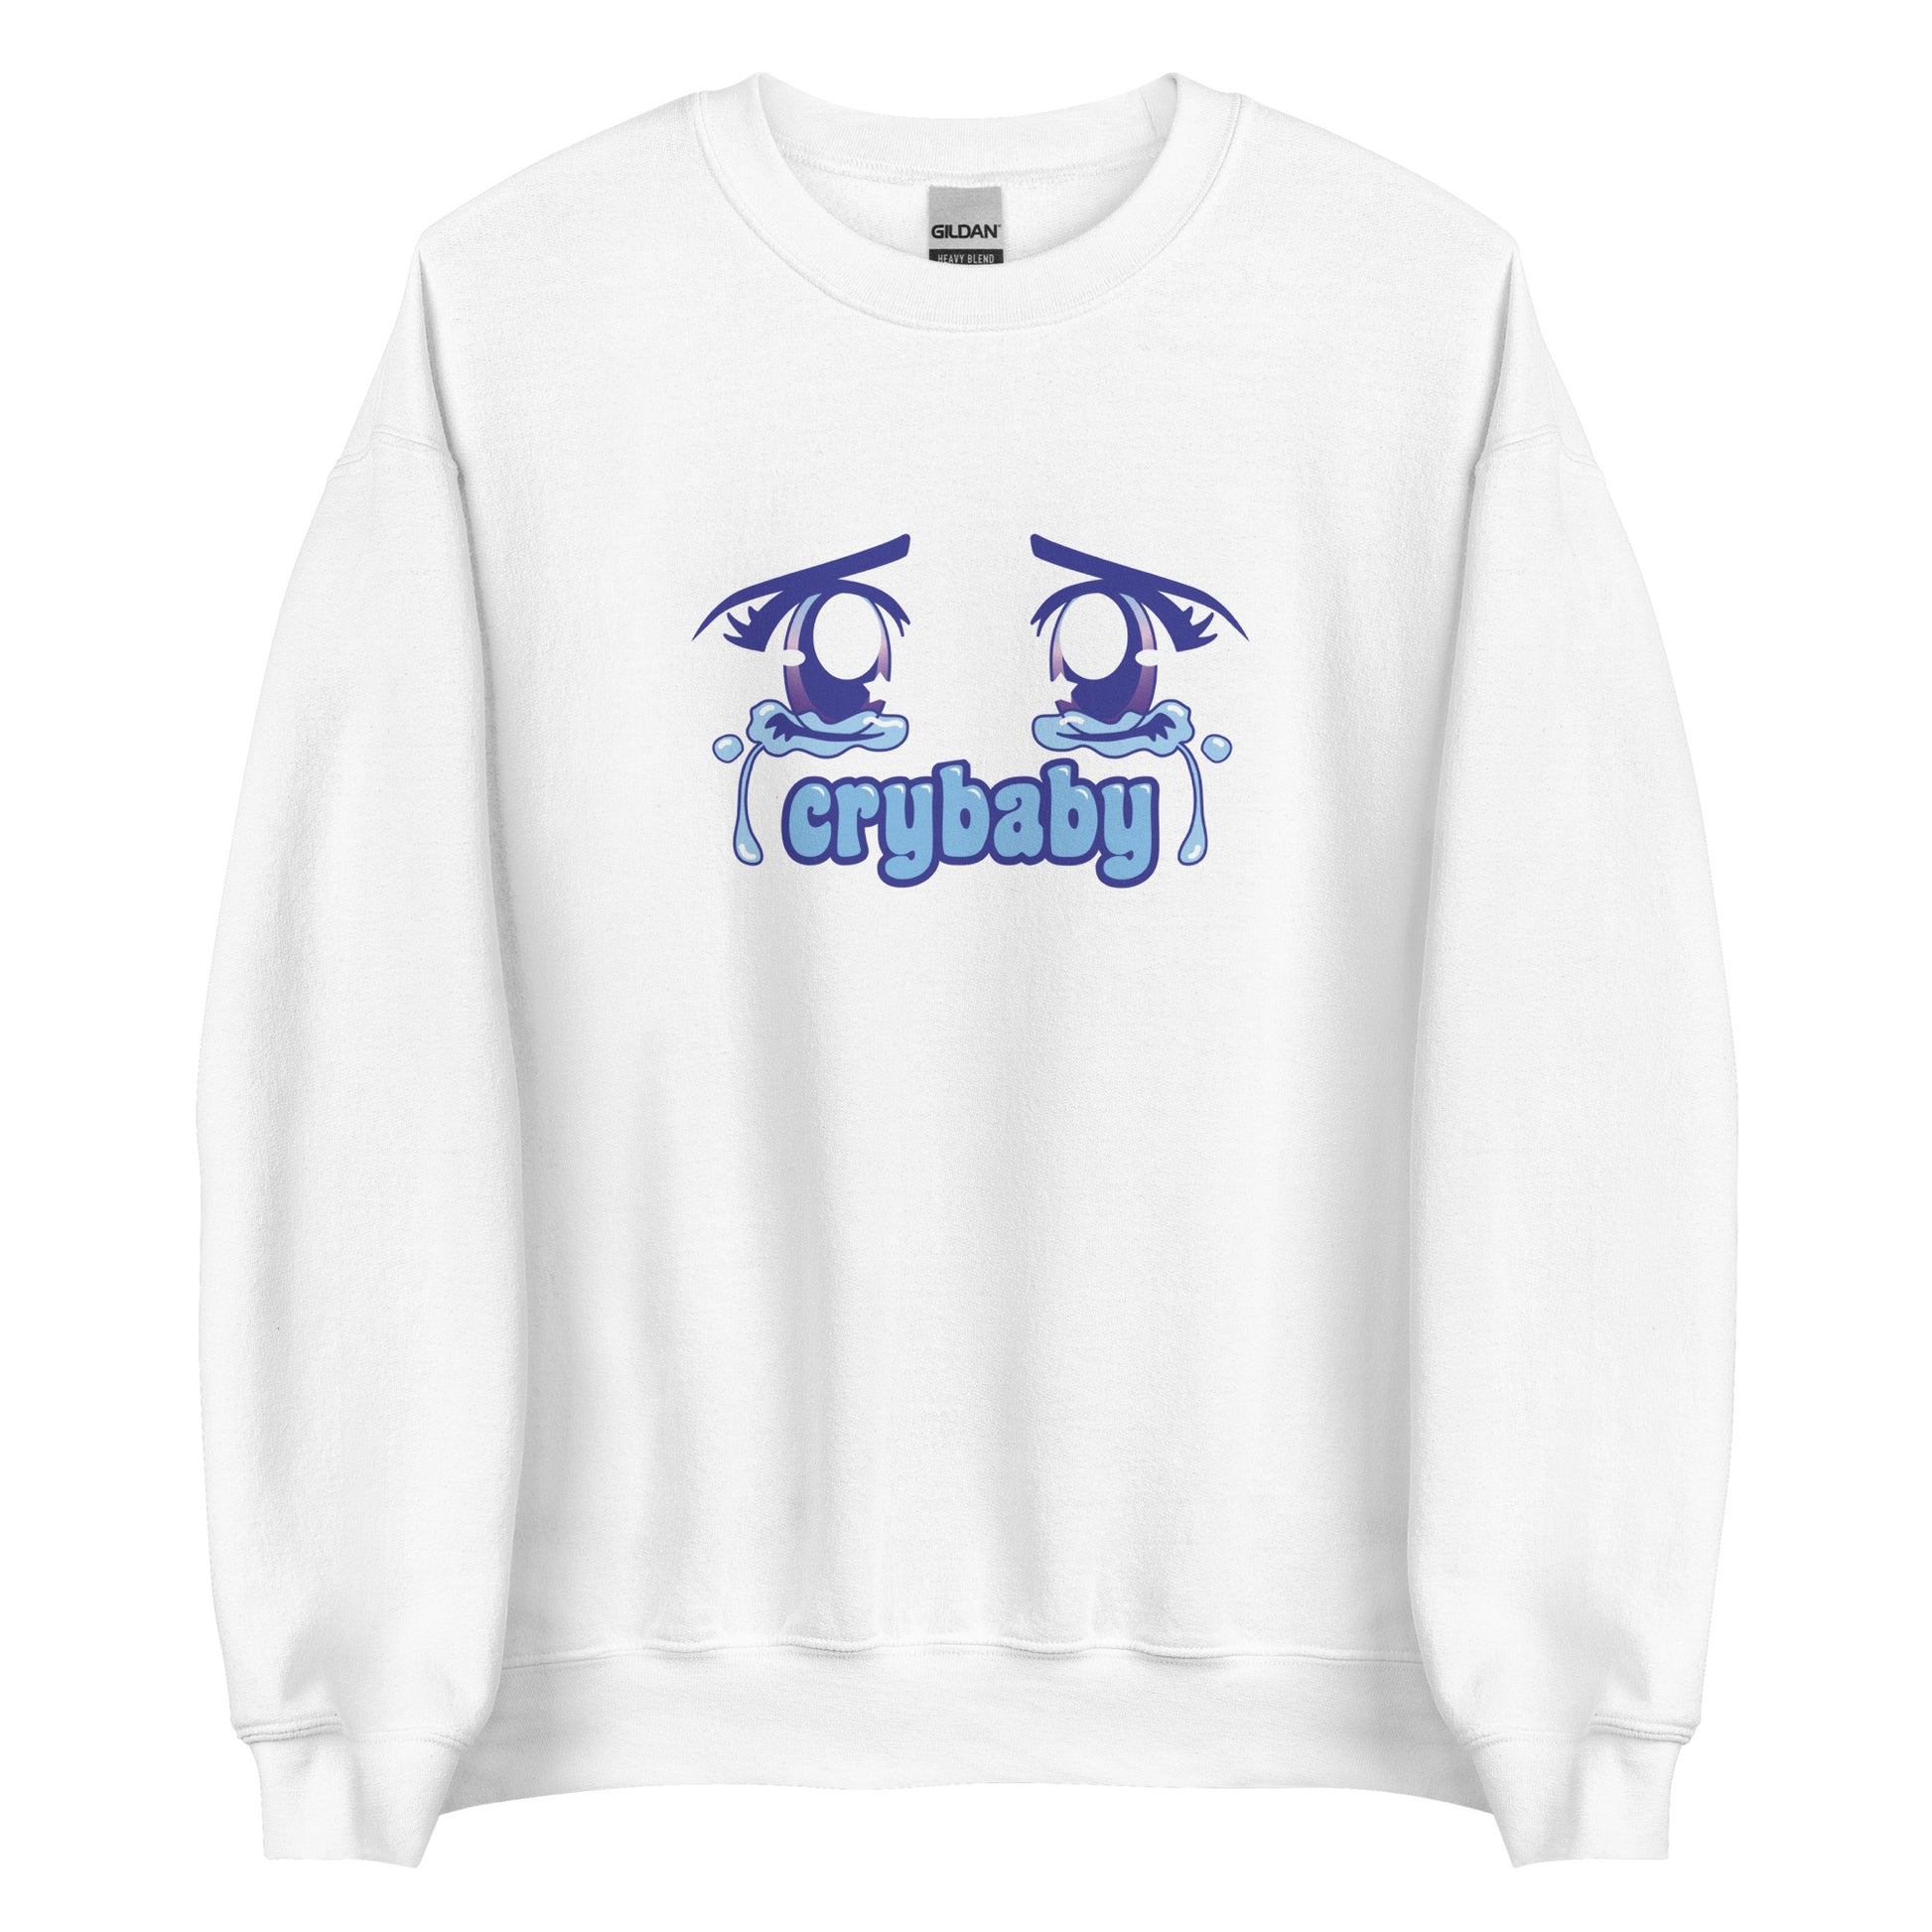 A white crewneck sweatshirt featuring large, sparkling purple anime eyes with tears streaming down. Text underneath the eyes in a rounded blue font reads "crybaby"